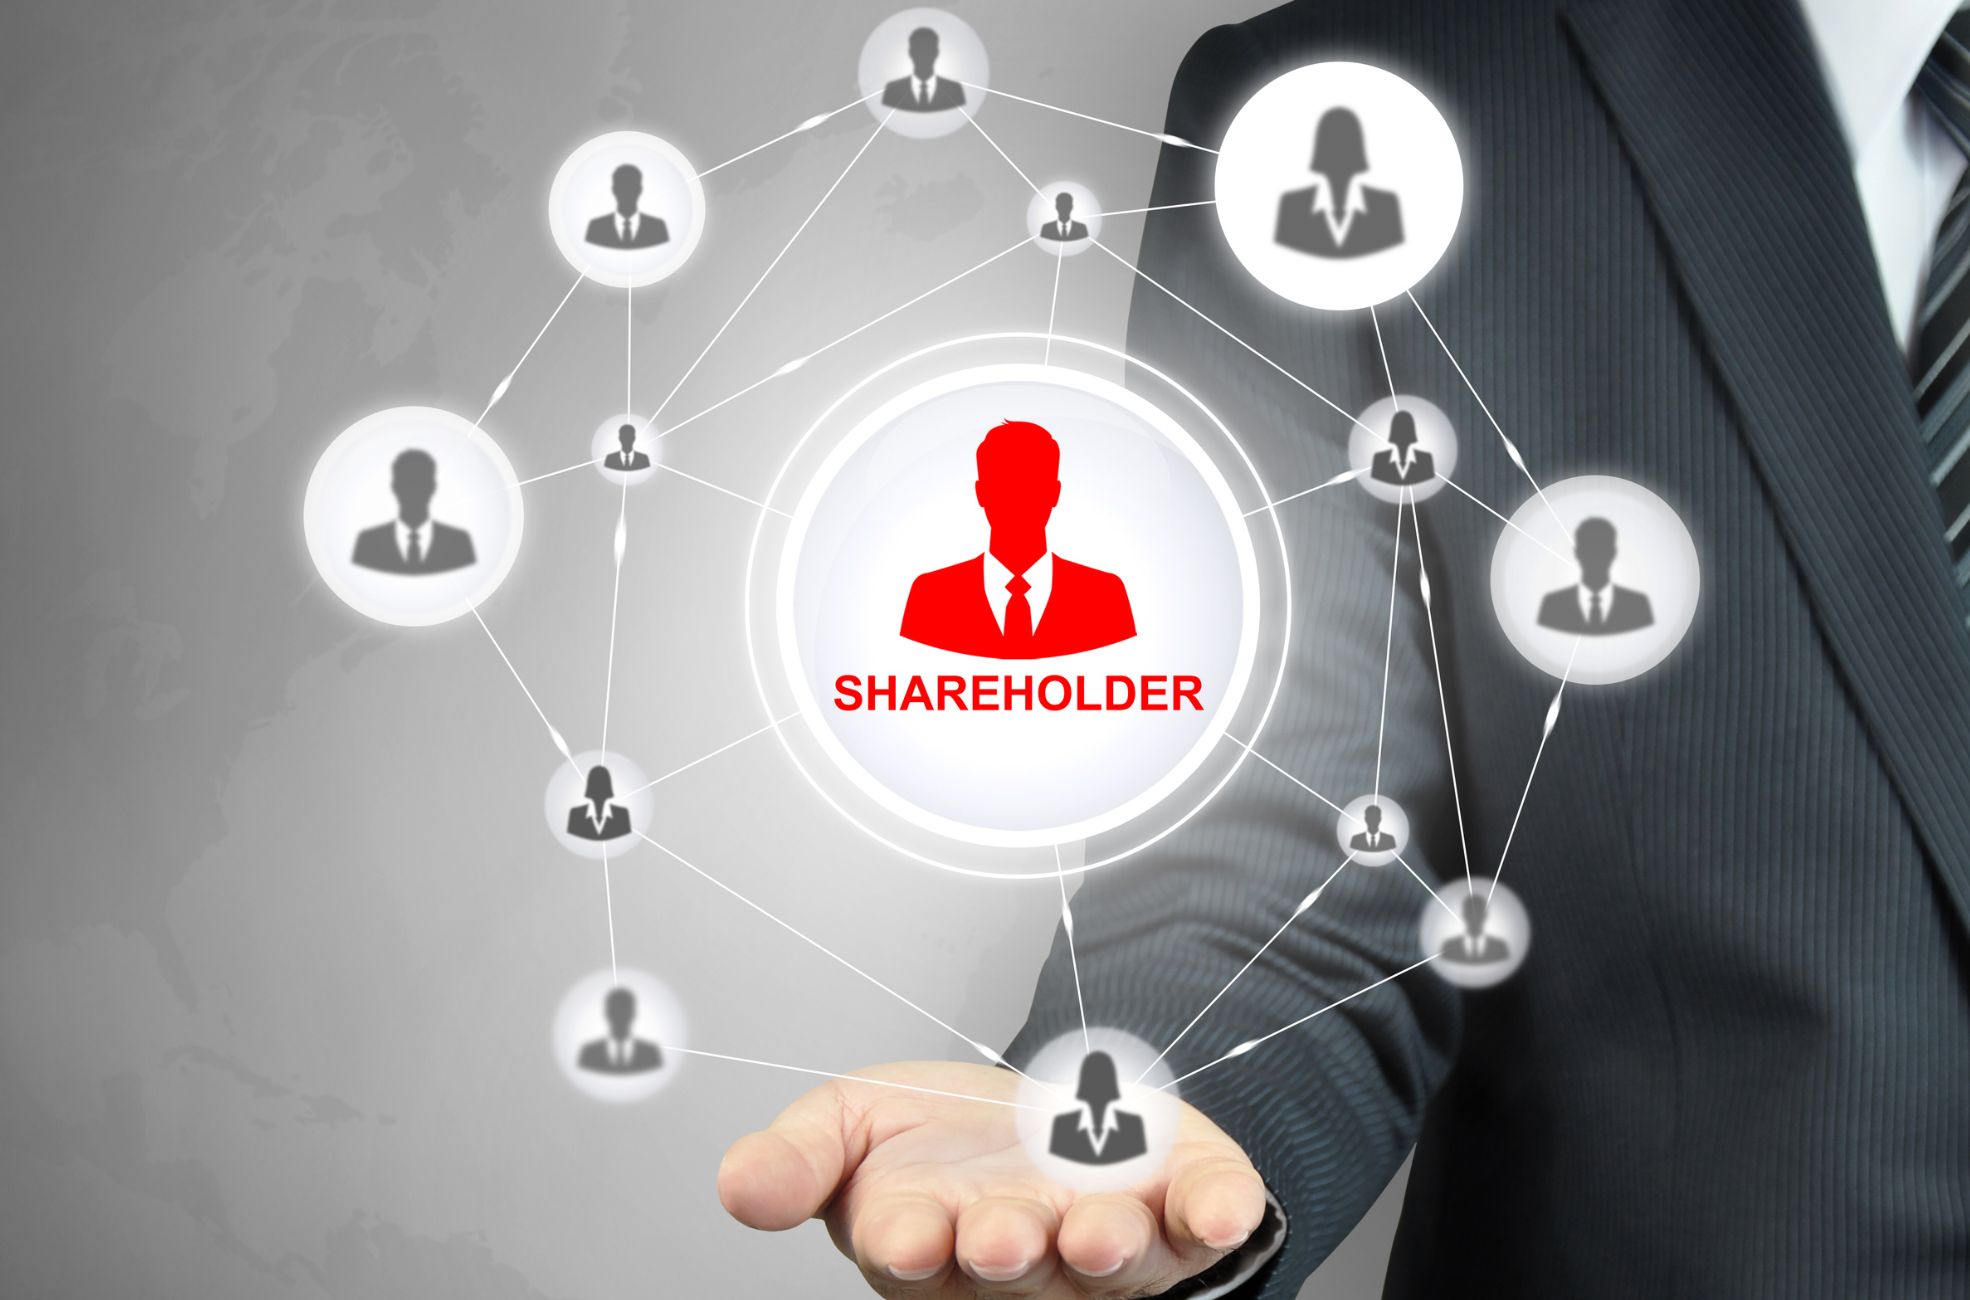 Diagram Of Shareholding Held By Man In Suit